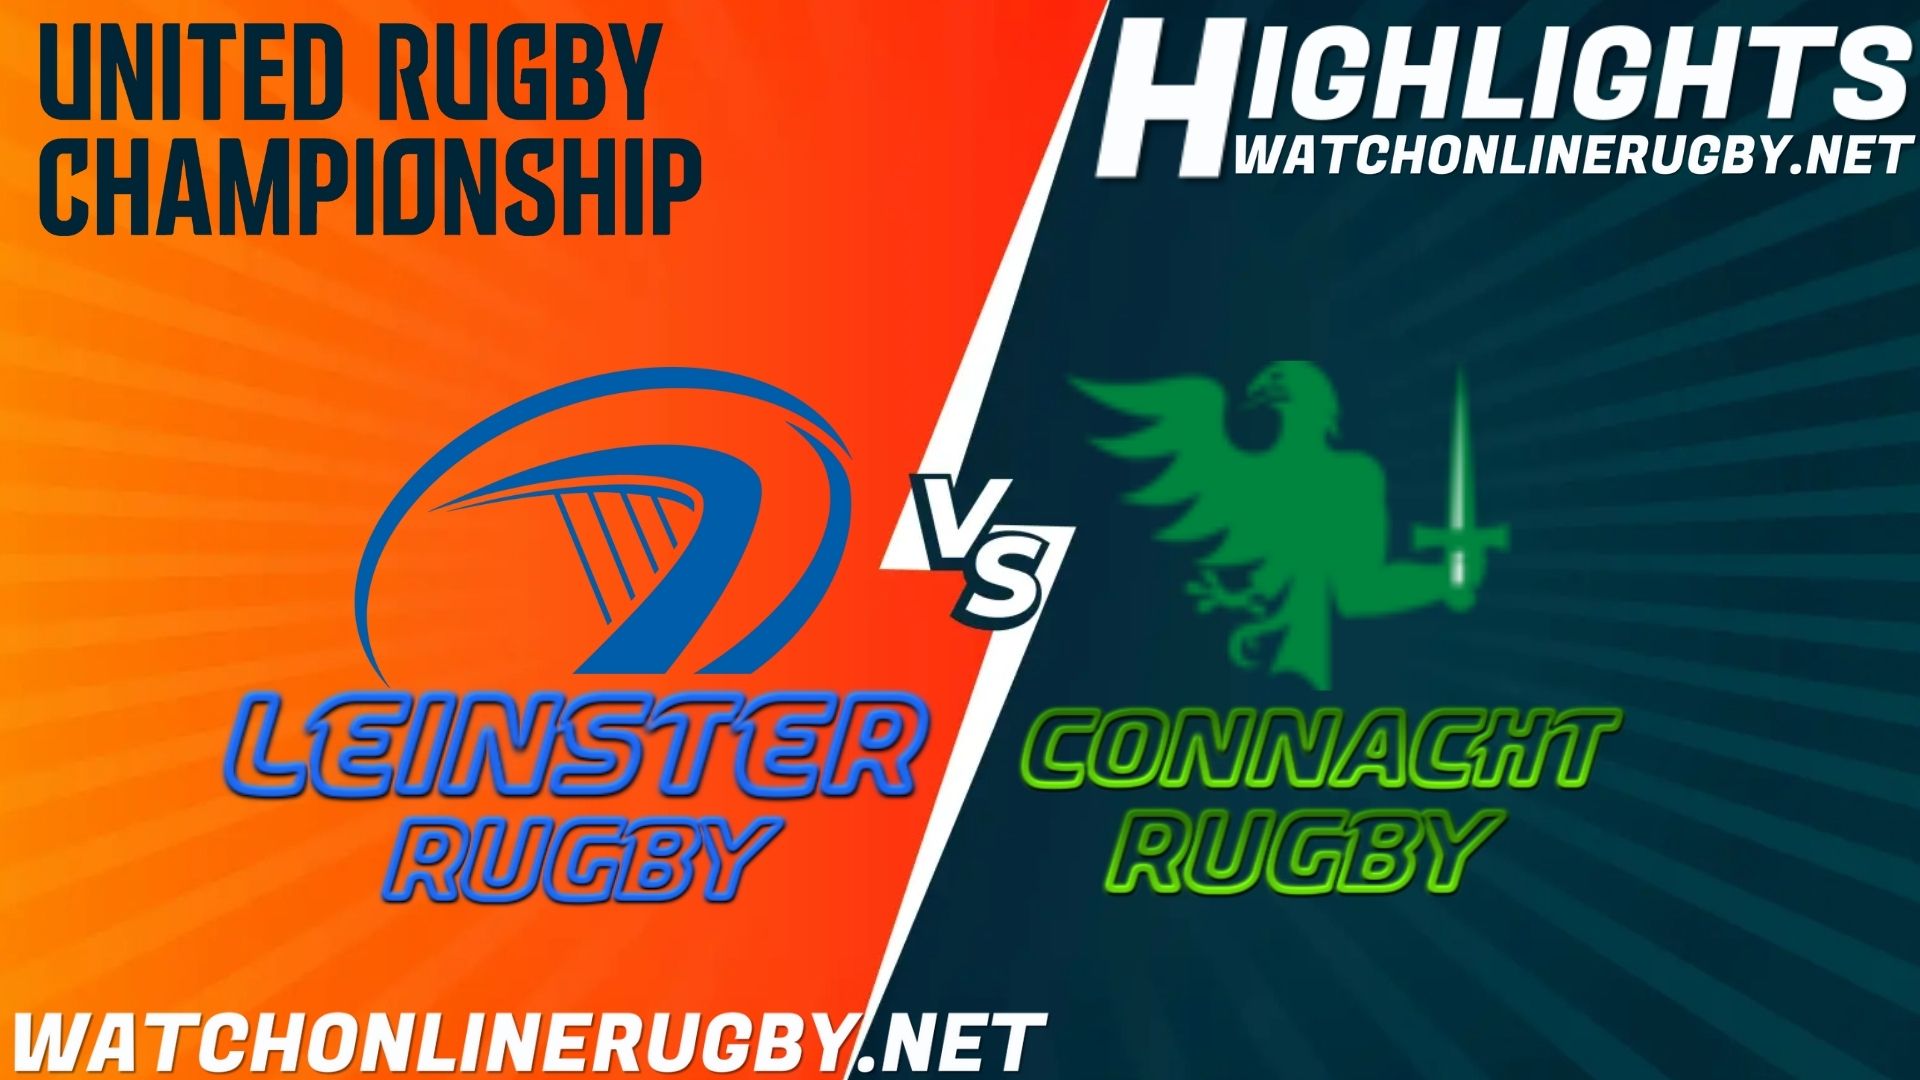 Leinster Rugby Vs Connacht Rugby Rugby United Rugby Championship 2021 RD 7